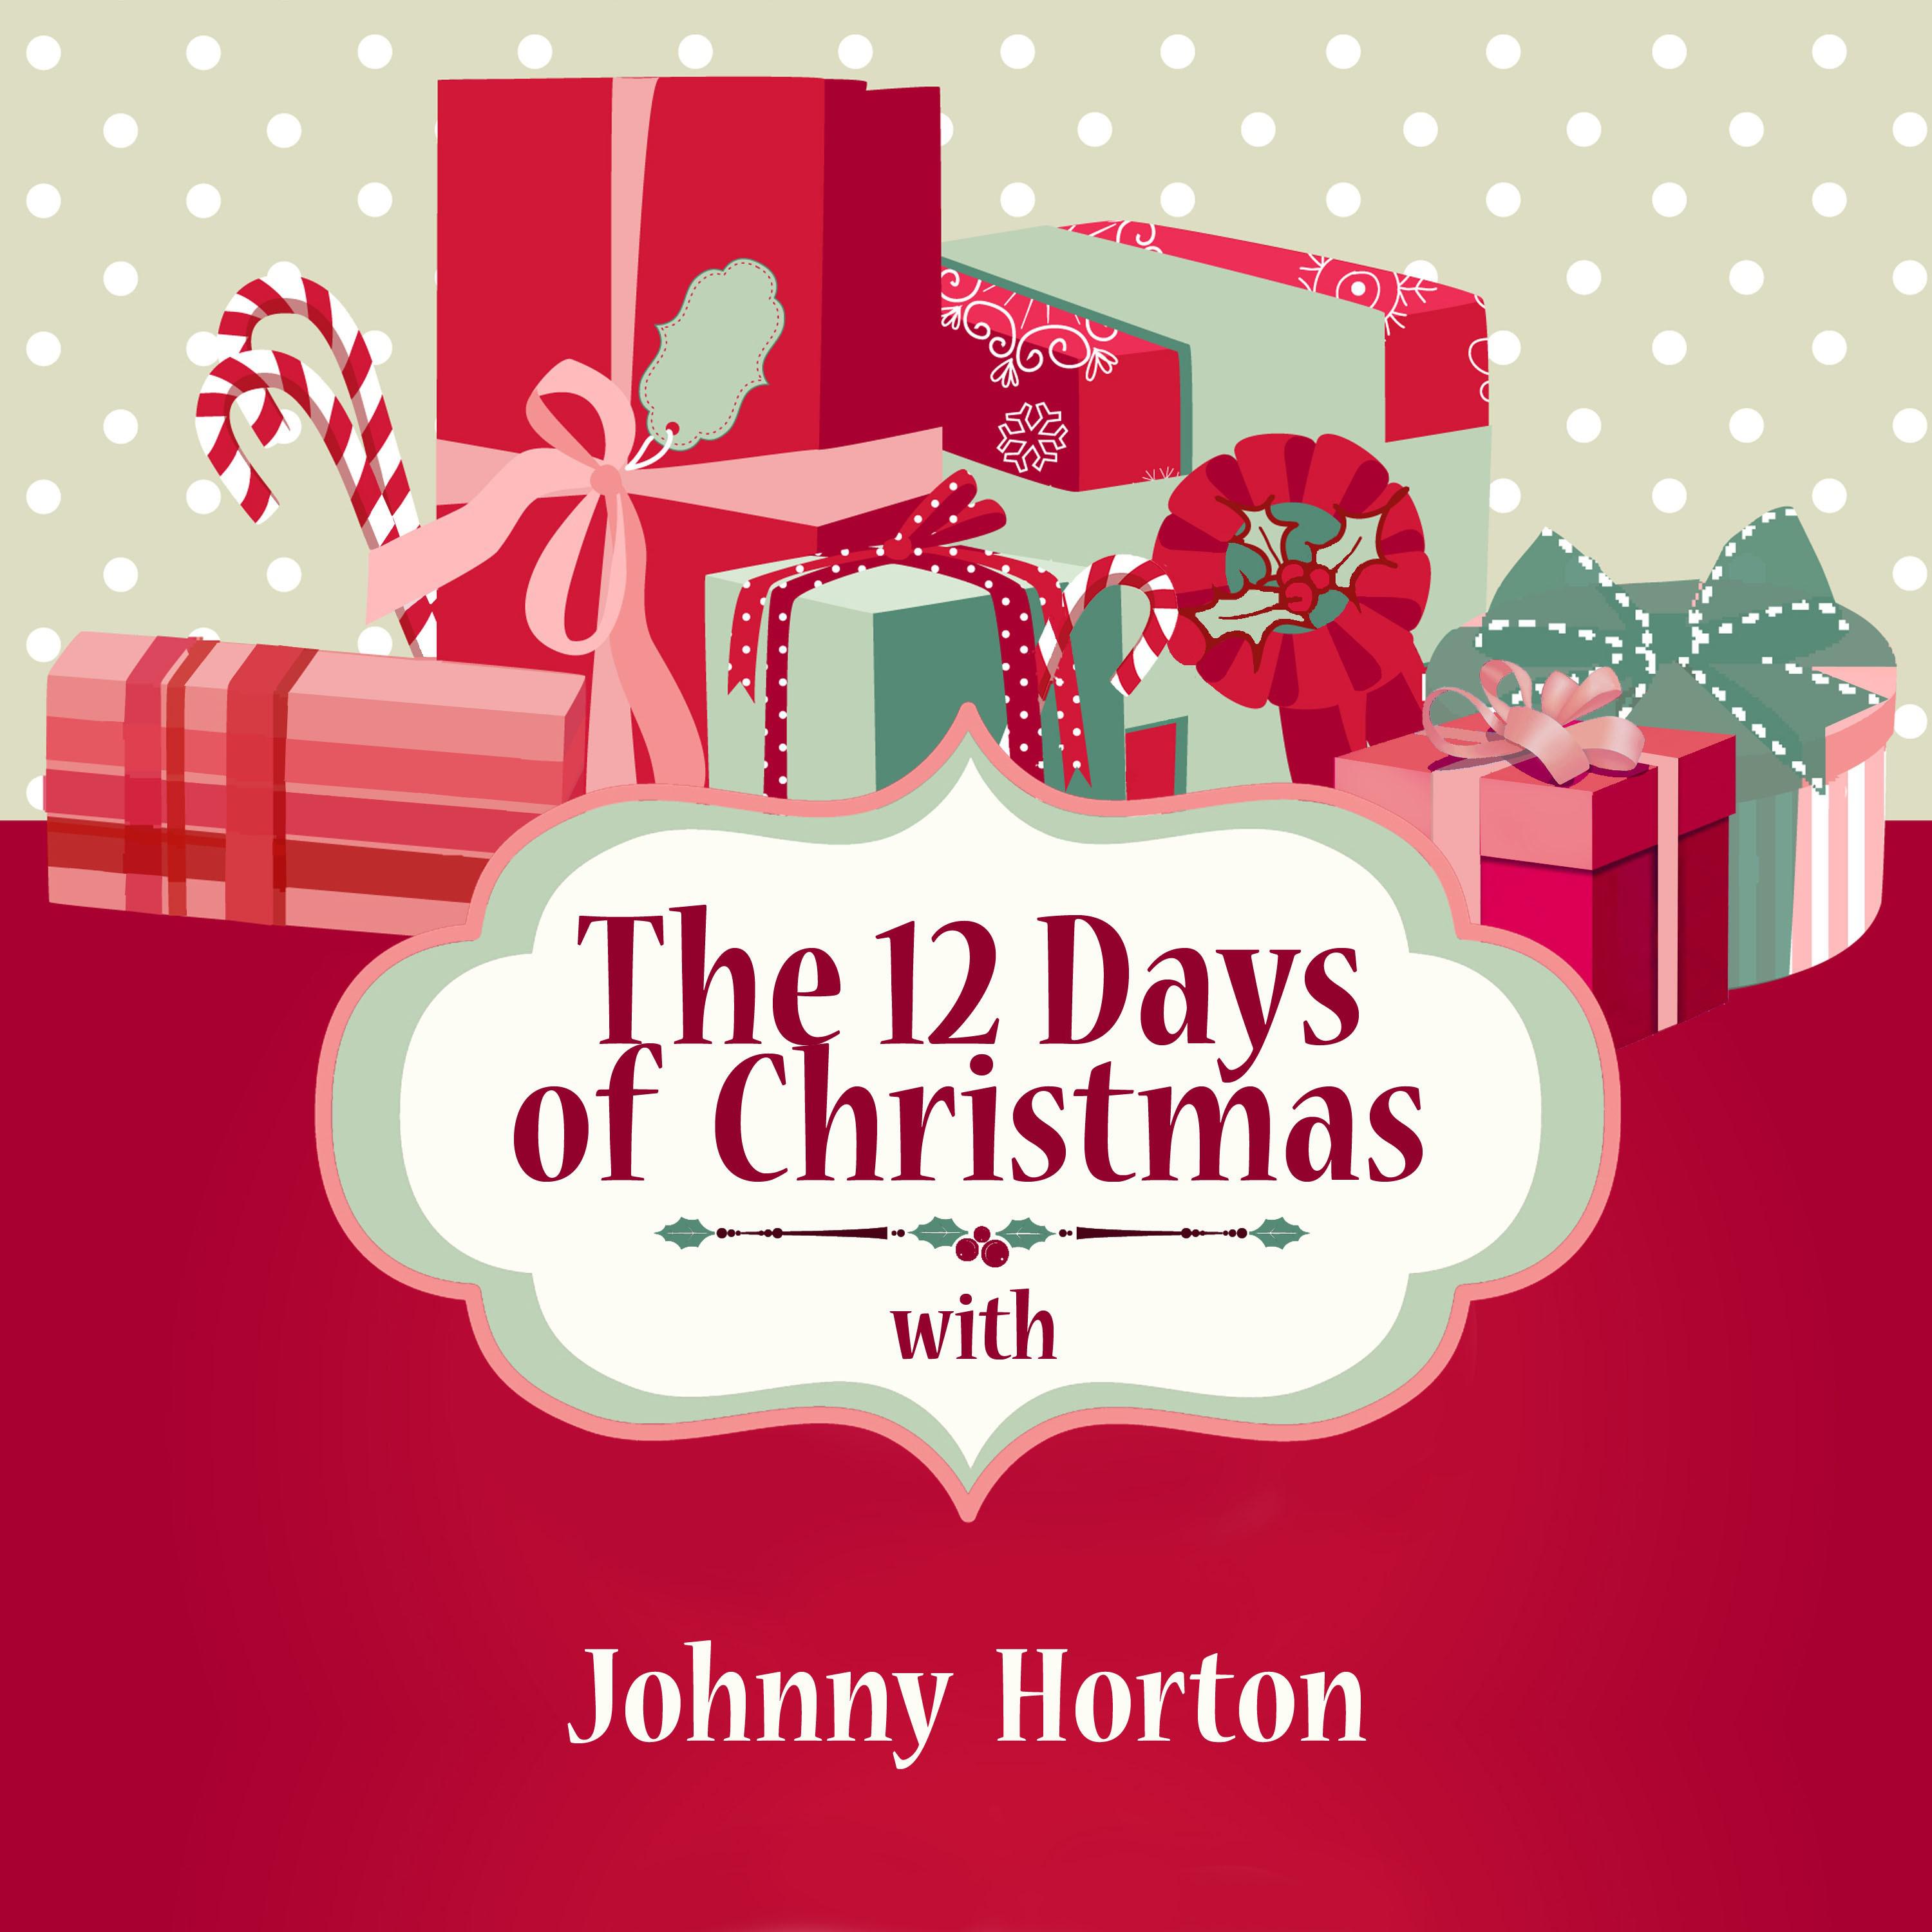 The 12 Days of Christmas with Johnny Horton